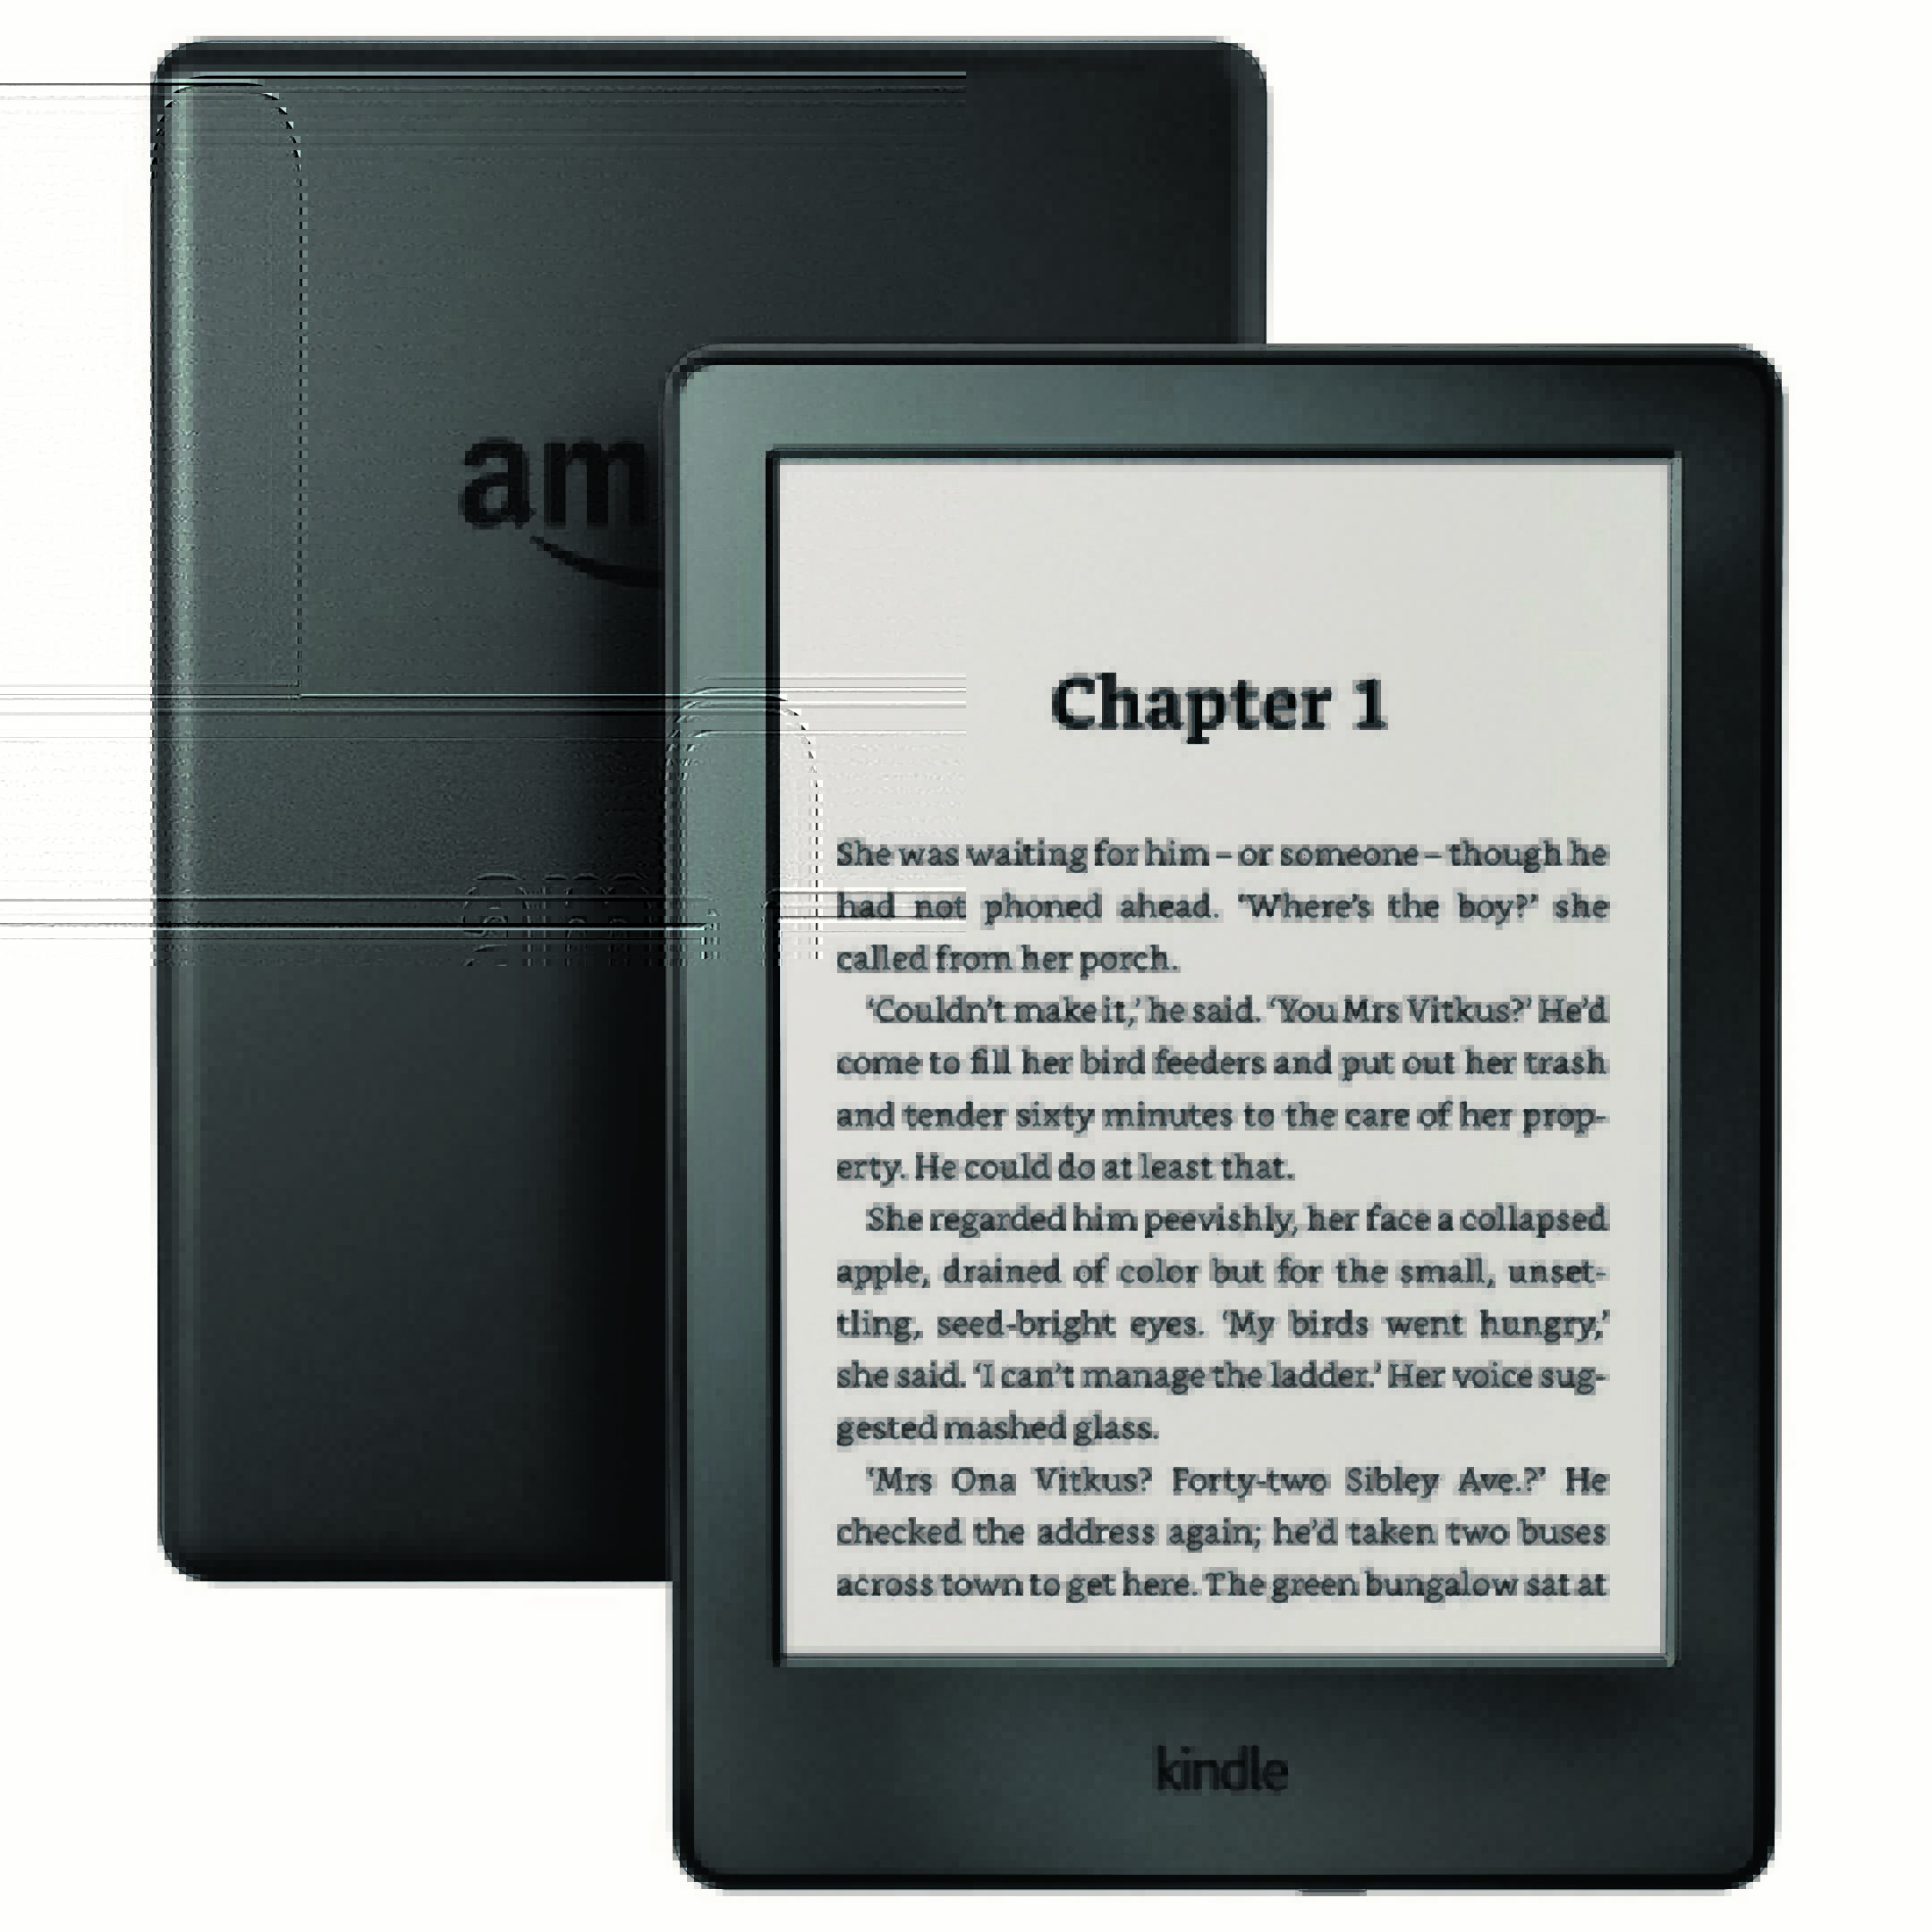 Looking for a new e-reader? Here are six you should check out